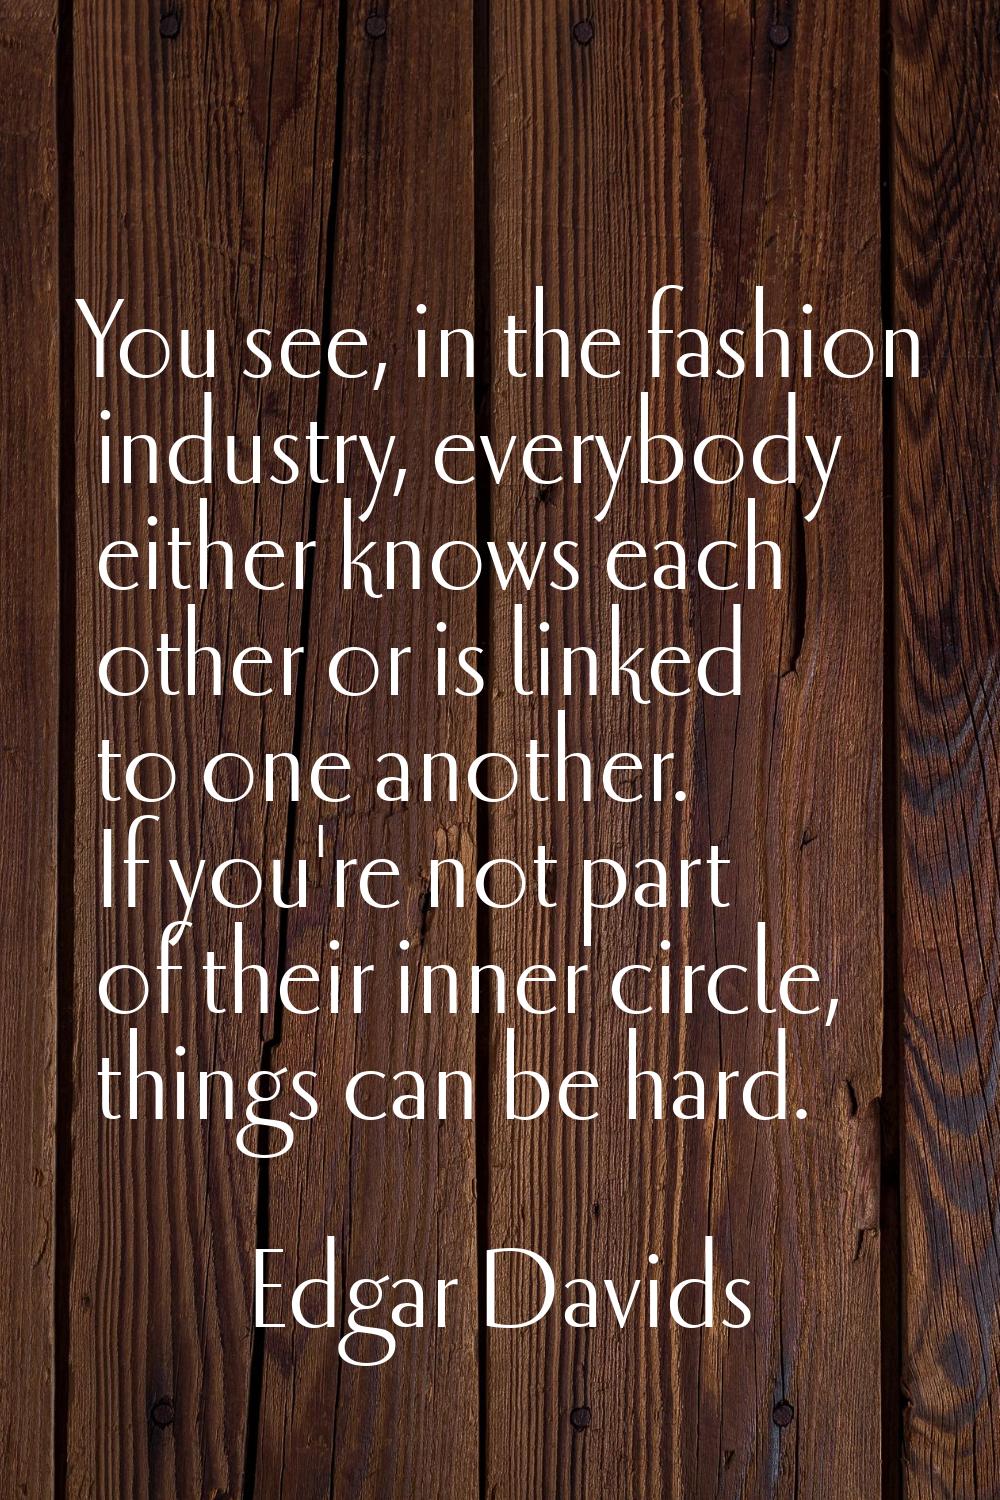 You see, in the fashion industry, everybody either knows each other or is linked to one another. If